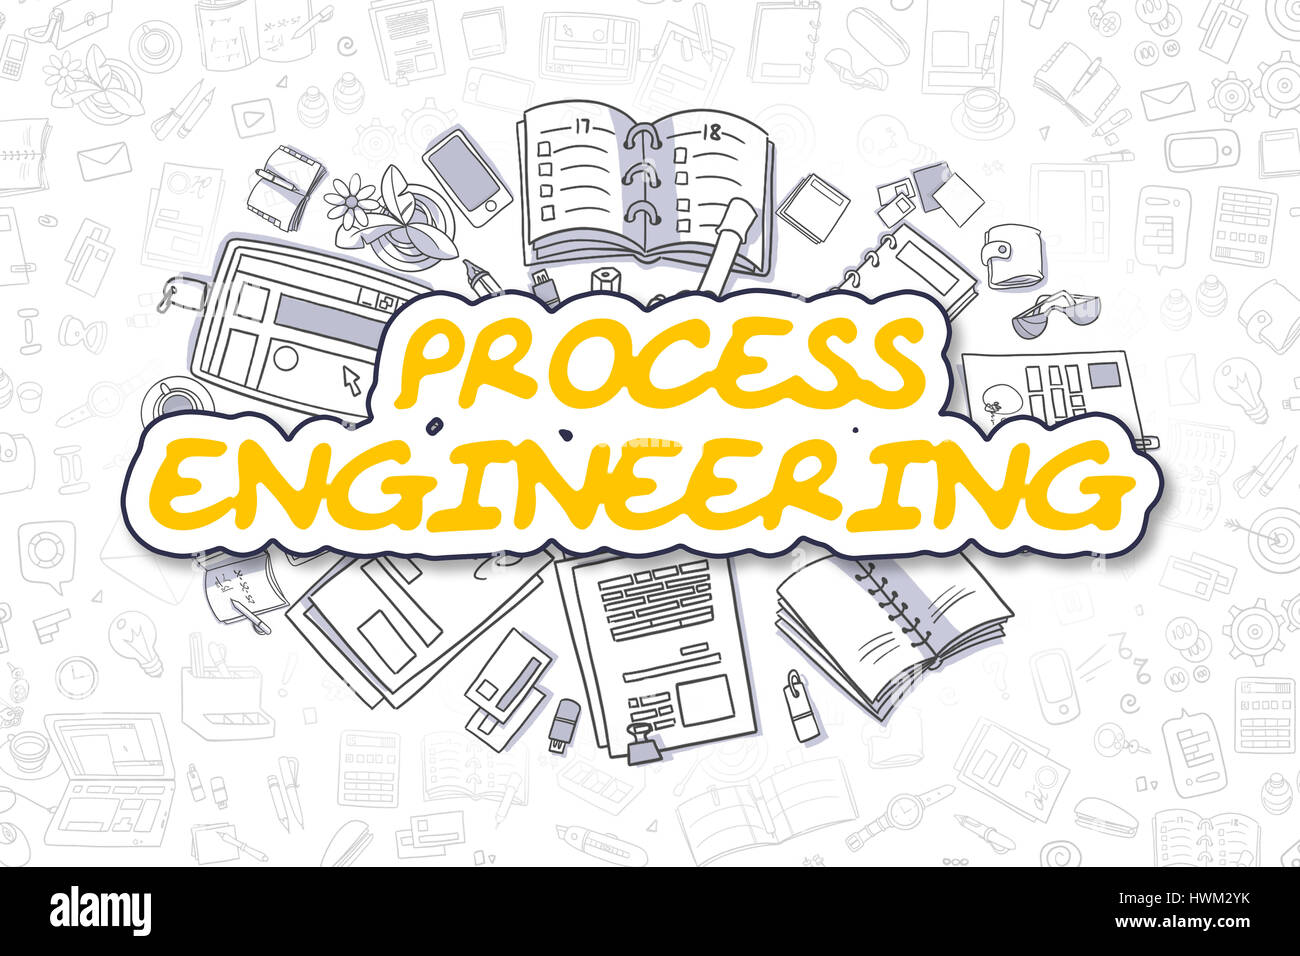 Process Engineering - Doodle Yellow Text. Business Concept. Stock Photo